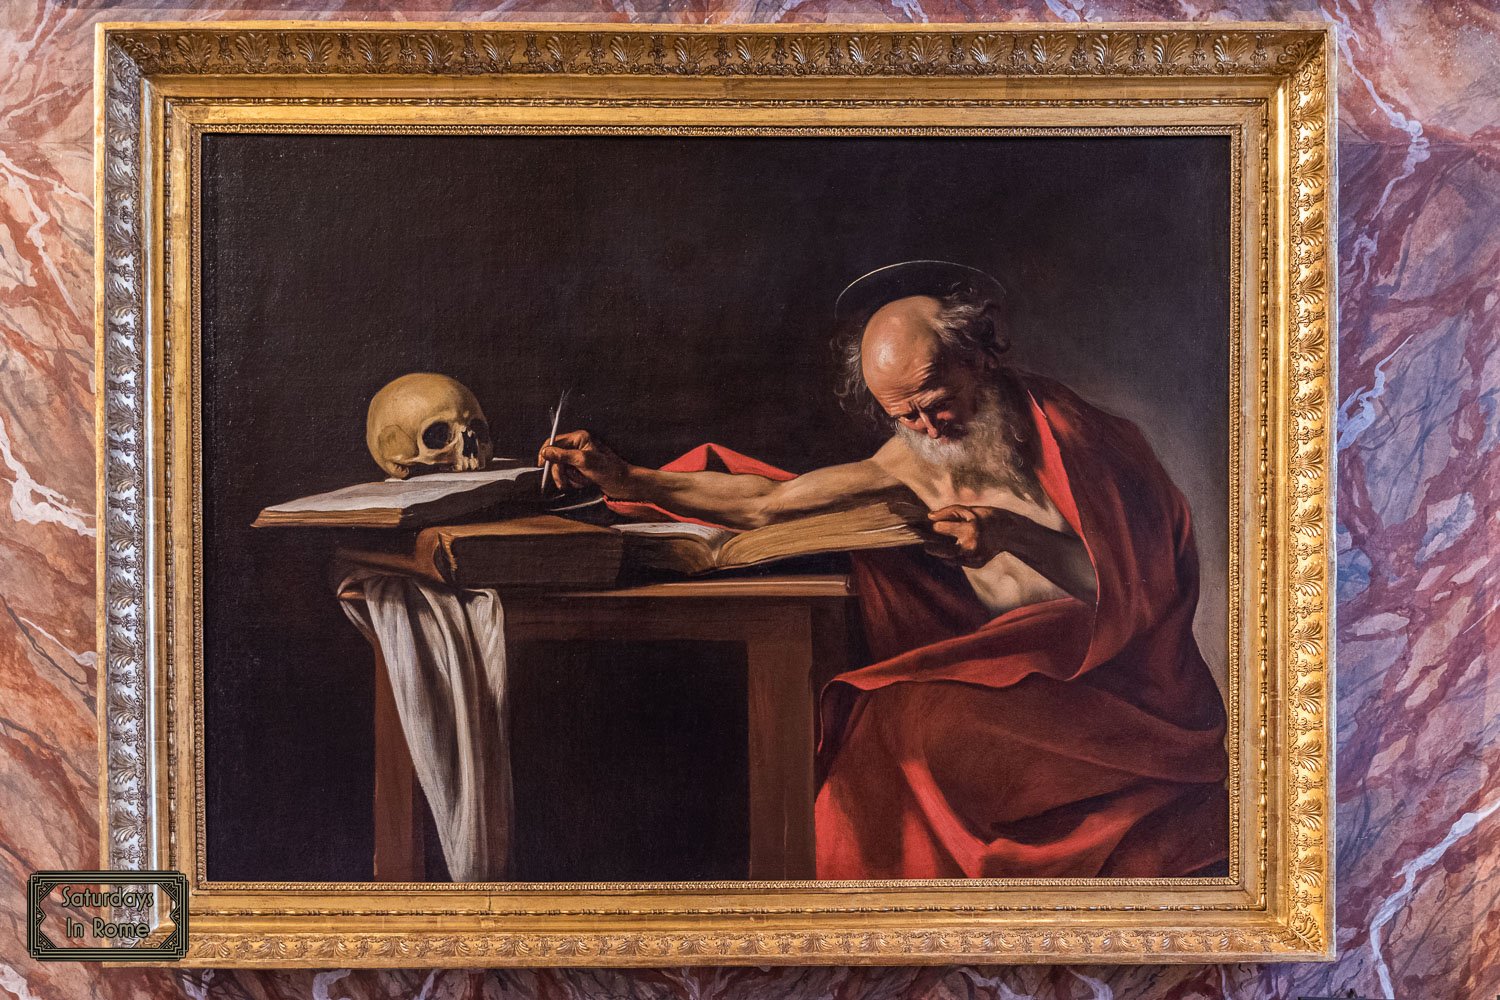 borghese gallery and museum - Caravaggio's Saint Jerome